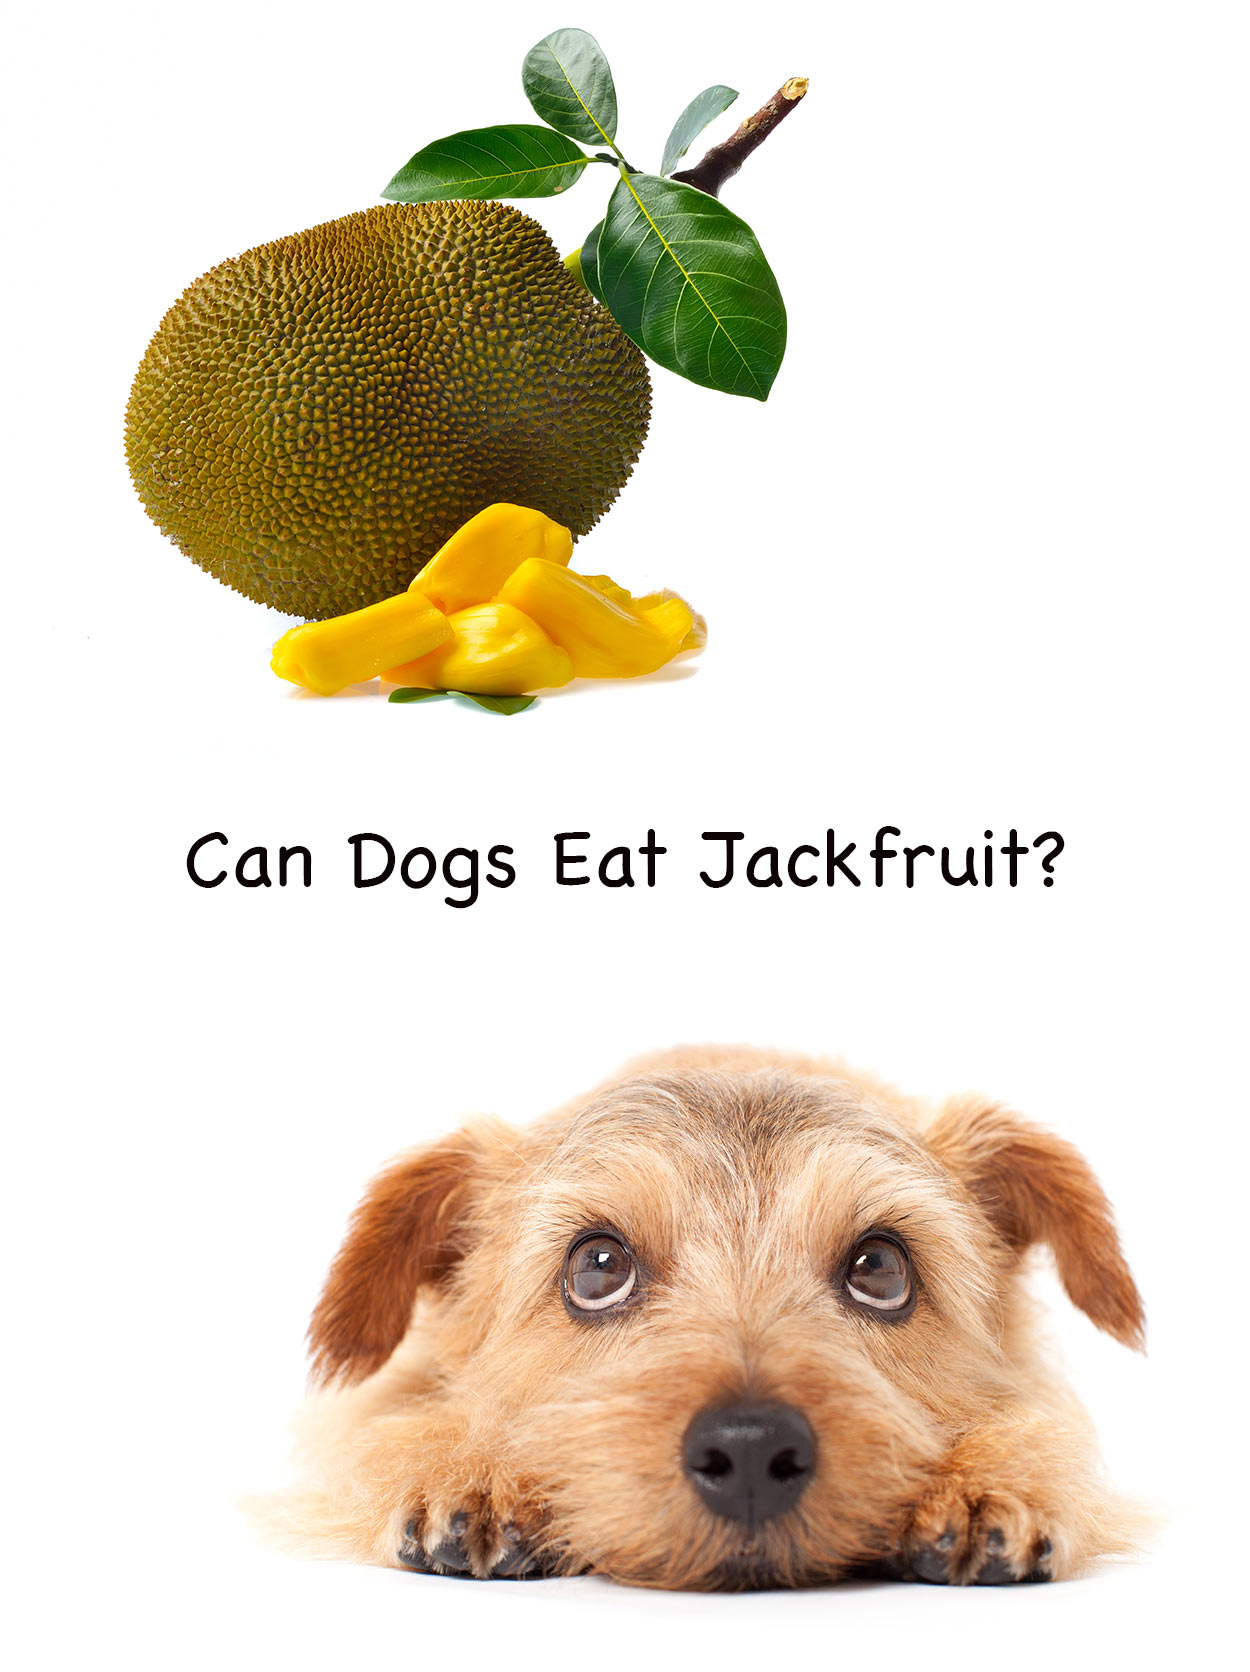 Can Dogs Eat Jackfruit Or Is It Potentially Harmful To Them?